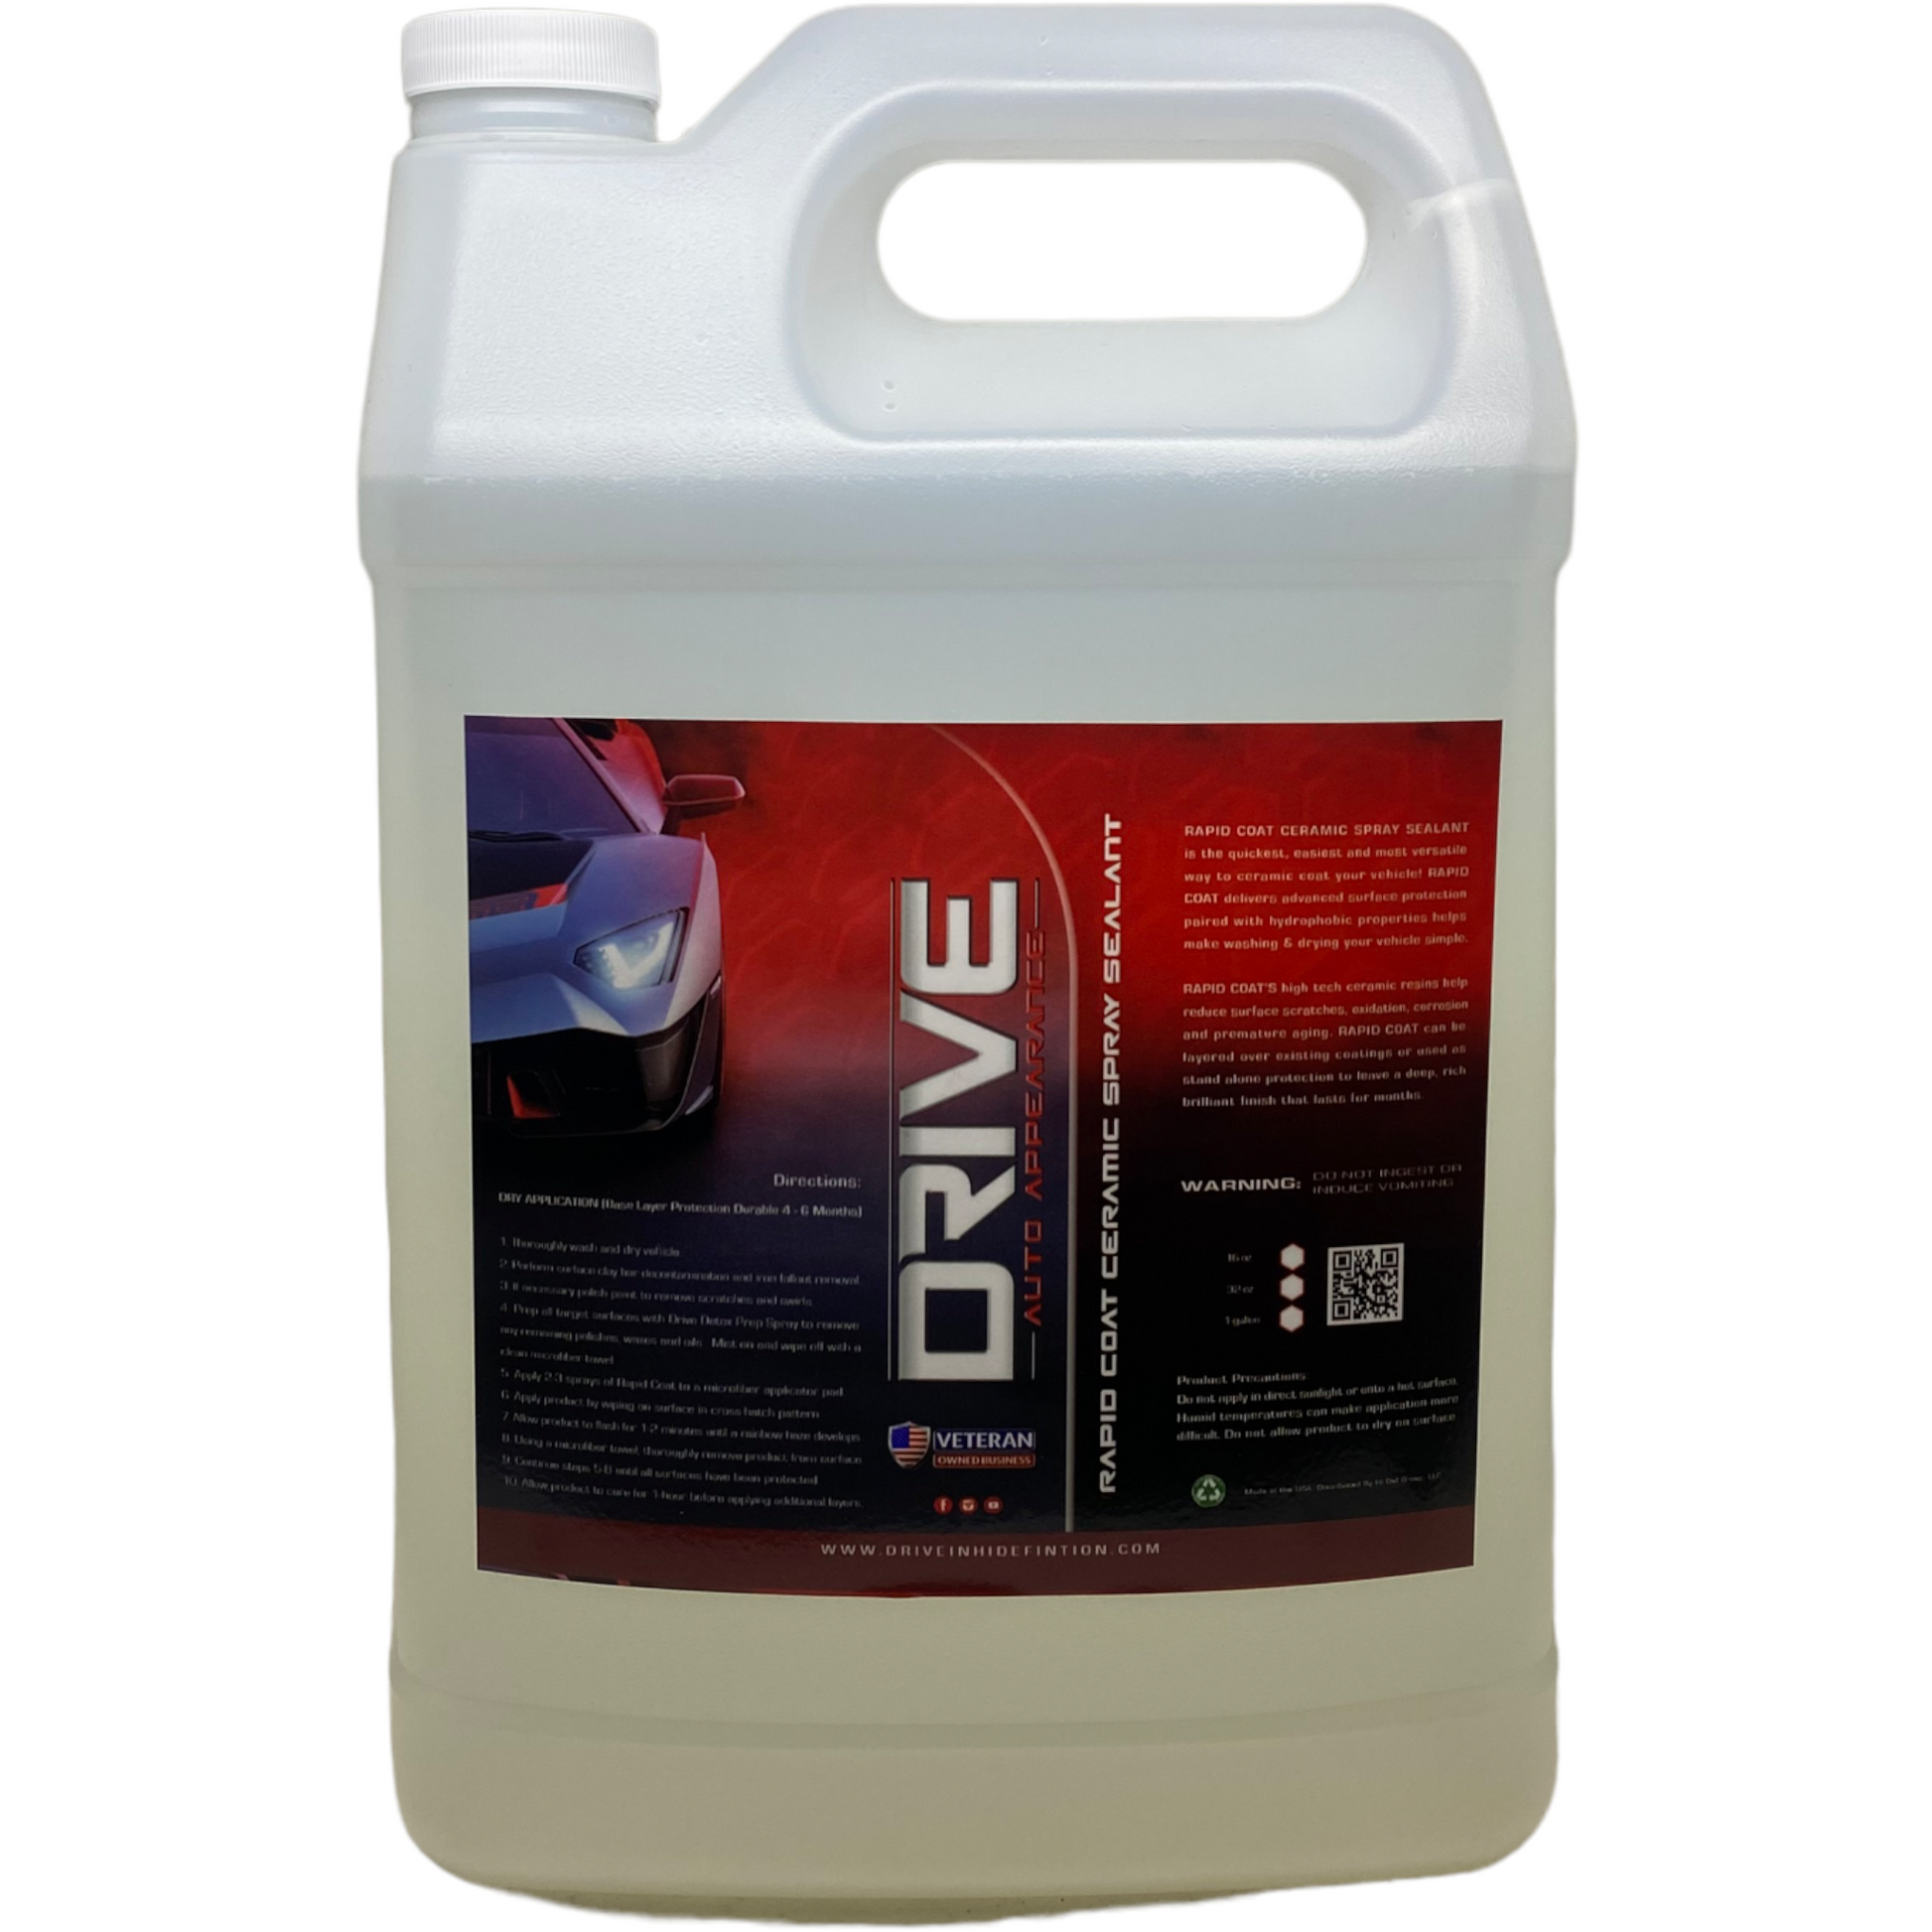 Hydrophobic Spray and Rinse - Product Overview 